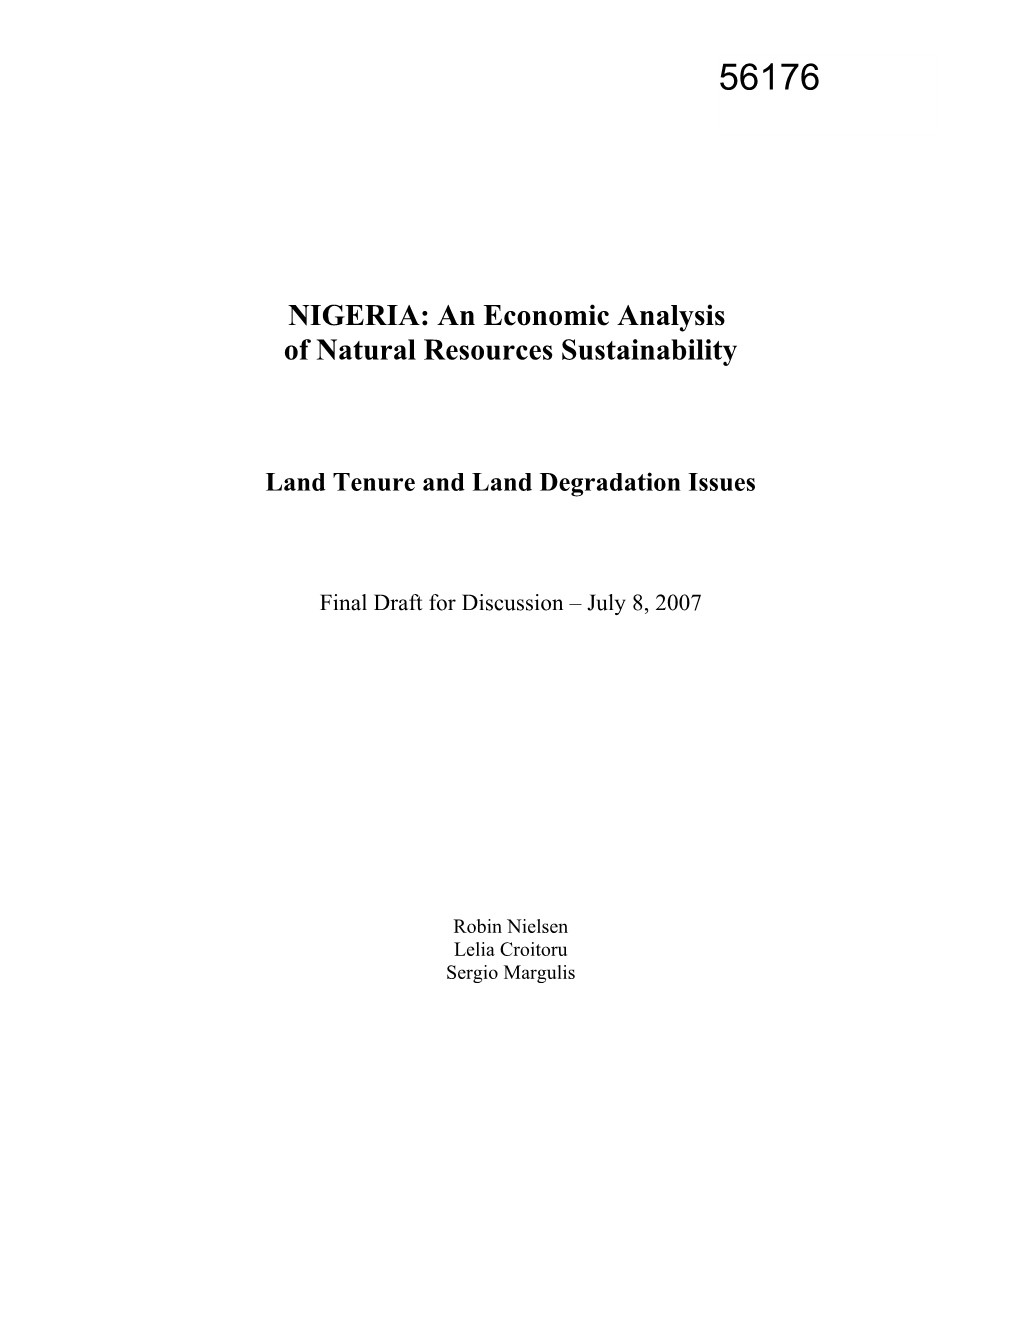 Land Tenure and Land Degradation Issues